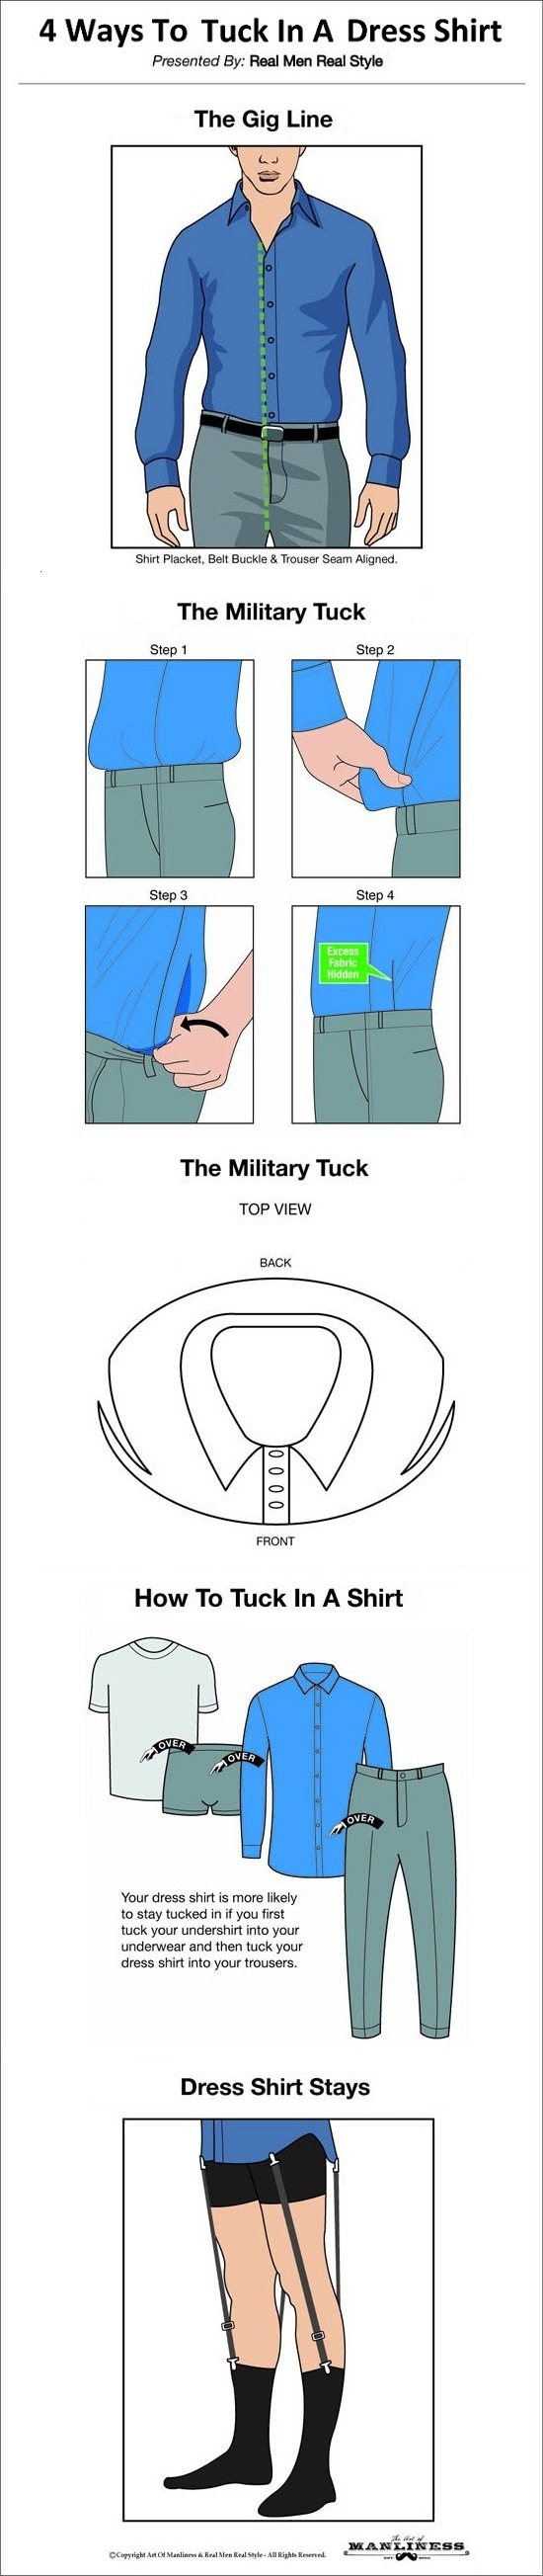 how to tuck in a shirt perfectly, perfect guide to tuck in a shirt